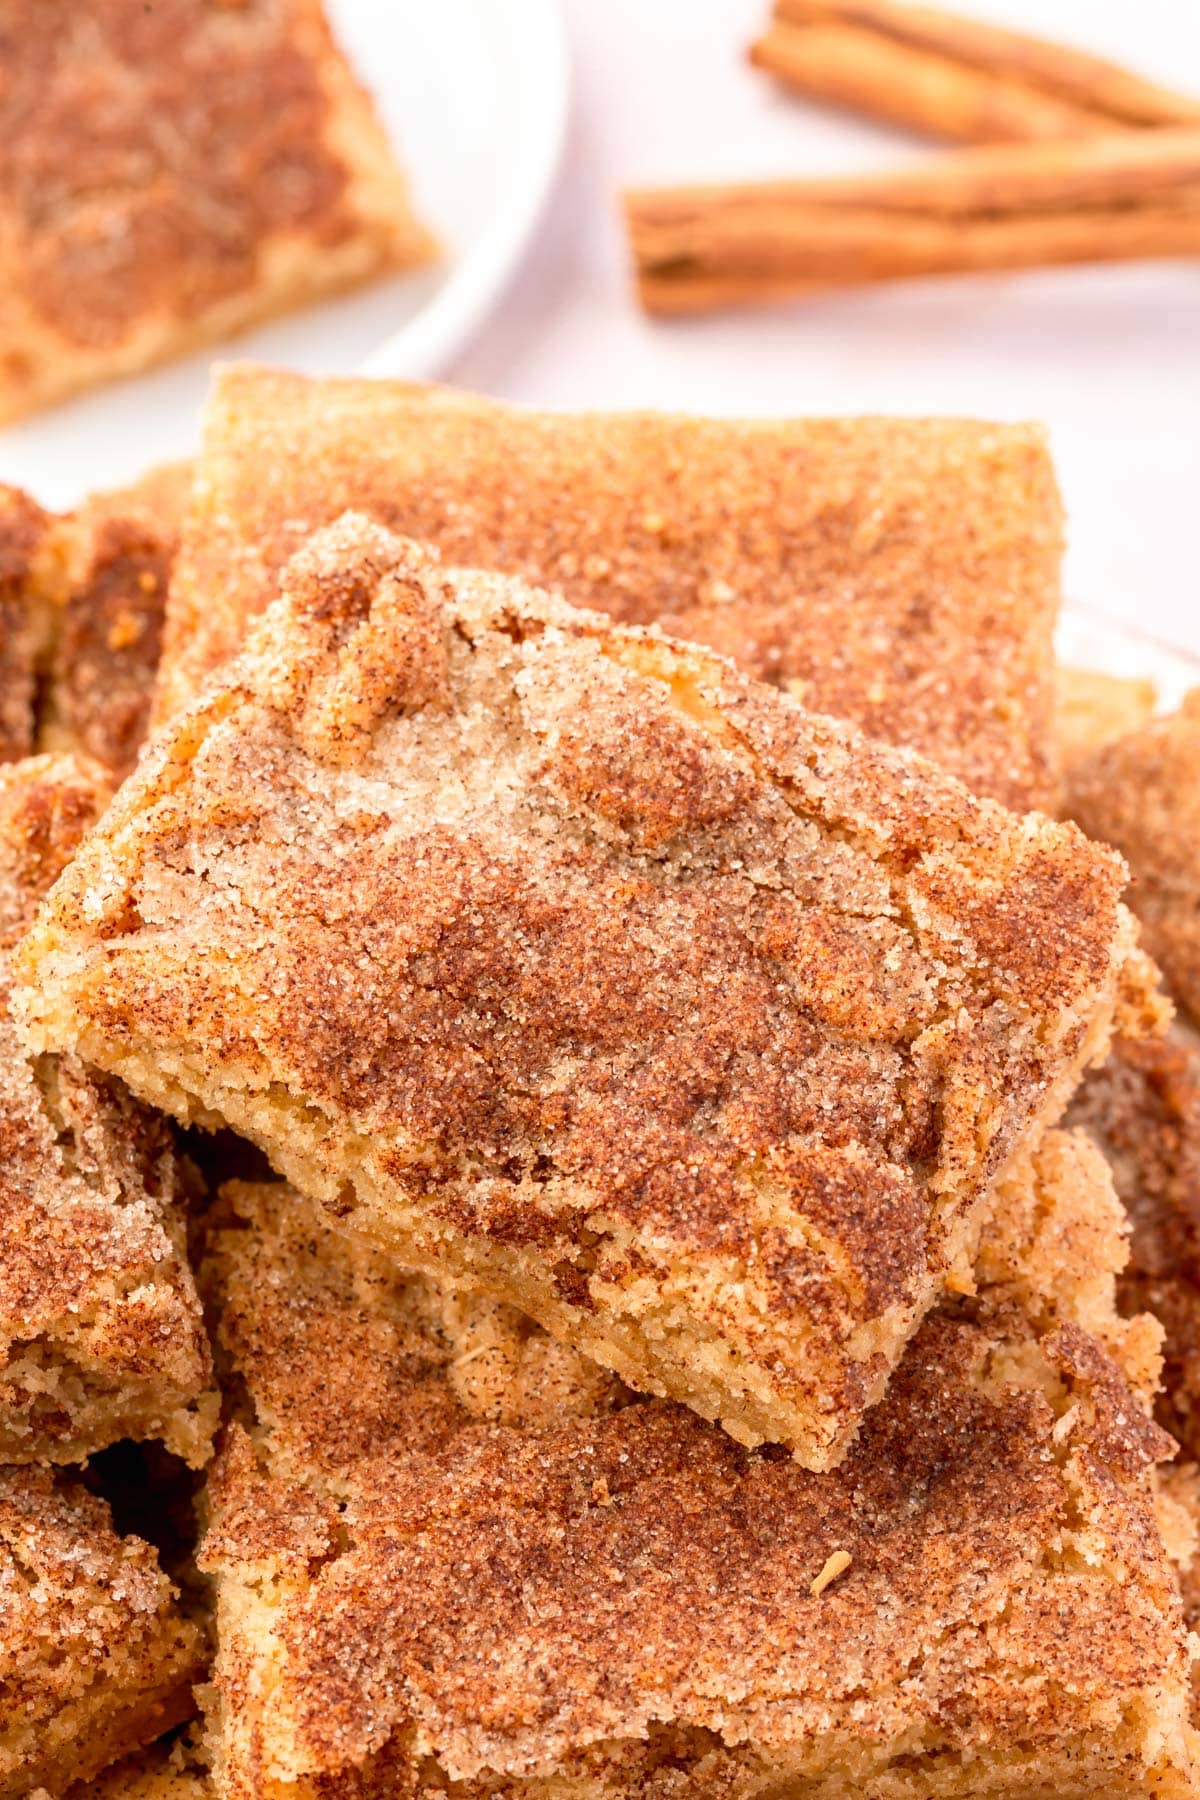 A stack of gluten-free snickerdoodle bars on a plate with cinnamon sticks in the background.